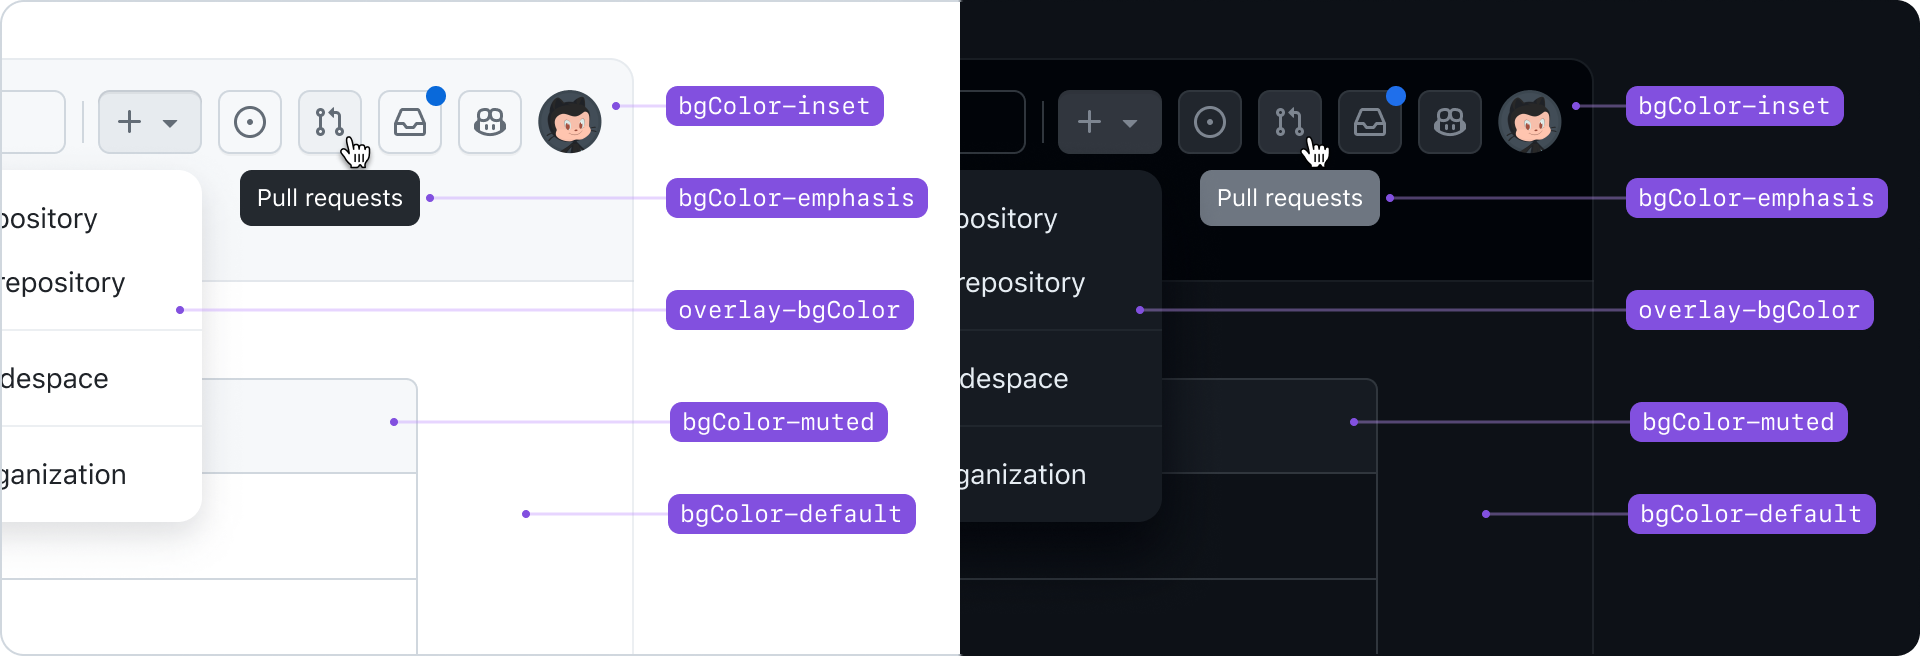 GitHub's navigation menu in light and dark themes, annotated to indicate background color roles. In light mode, the menu has 'bgColor-inset' for the avatar circle, 'bgColor-emphasis' for the 'Pull requests' button, 'overlay-bgColor' for hover effects, 'bgColor-muted' for inactive menu items, and 'bgColor-default' for the overall background. The dark mode mirrors this scheme with appropriate colors for visibility.